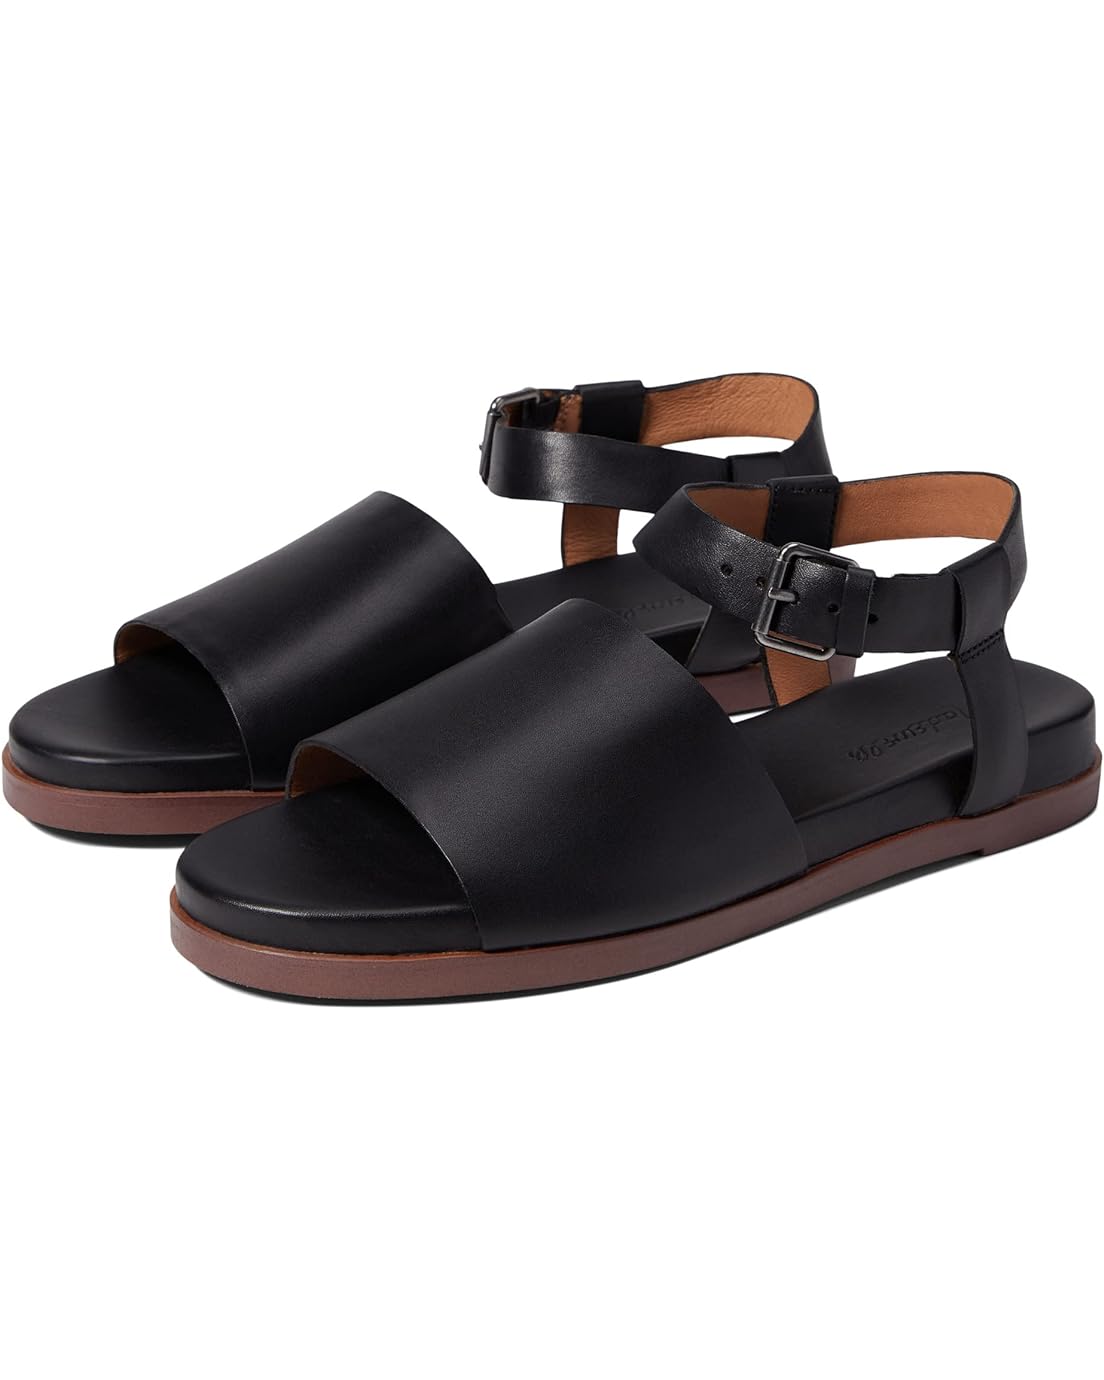 Madewell The Noelle Ankle-Strap Flat